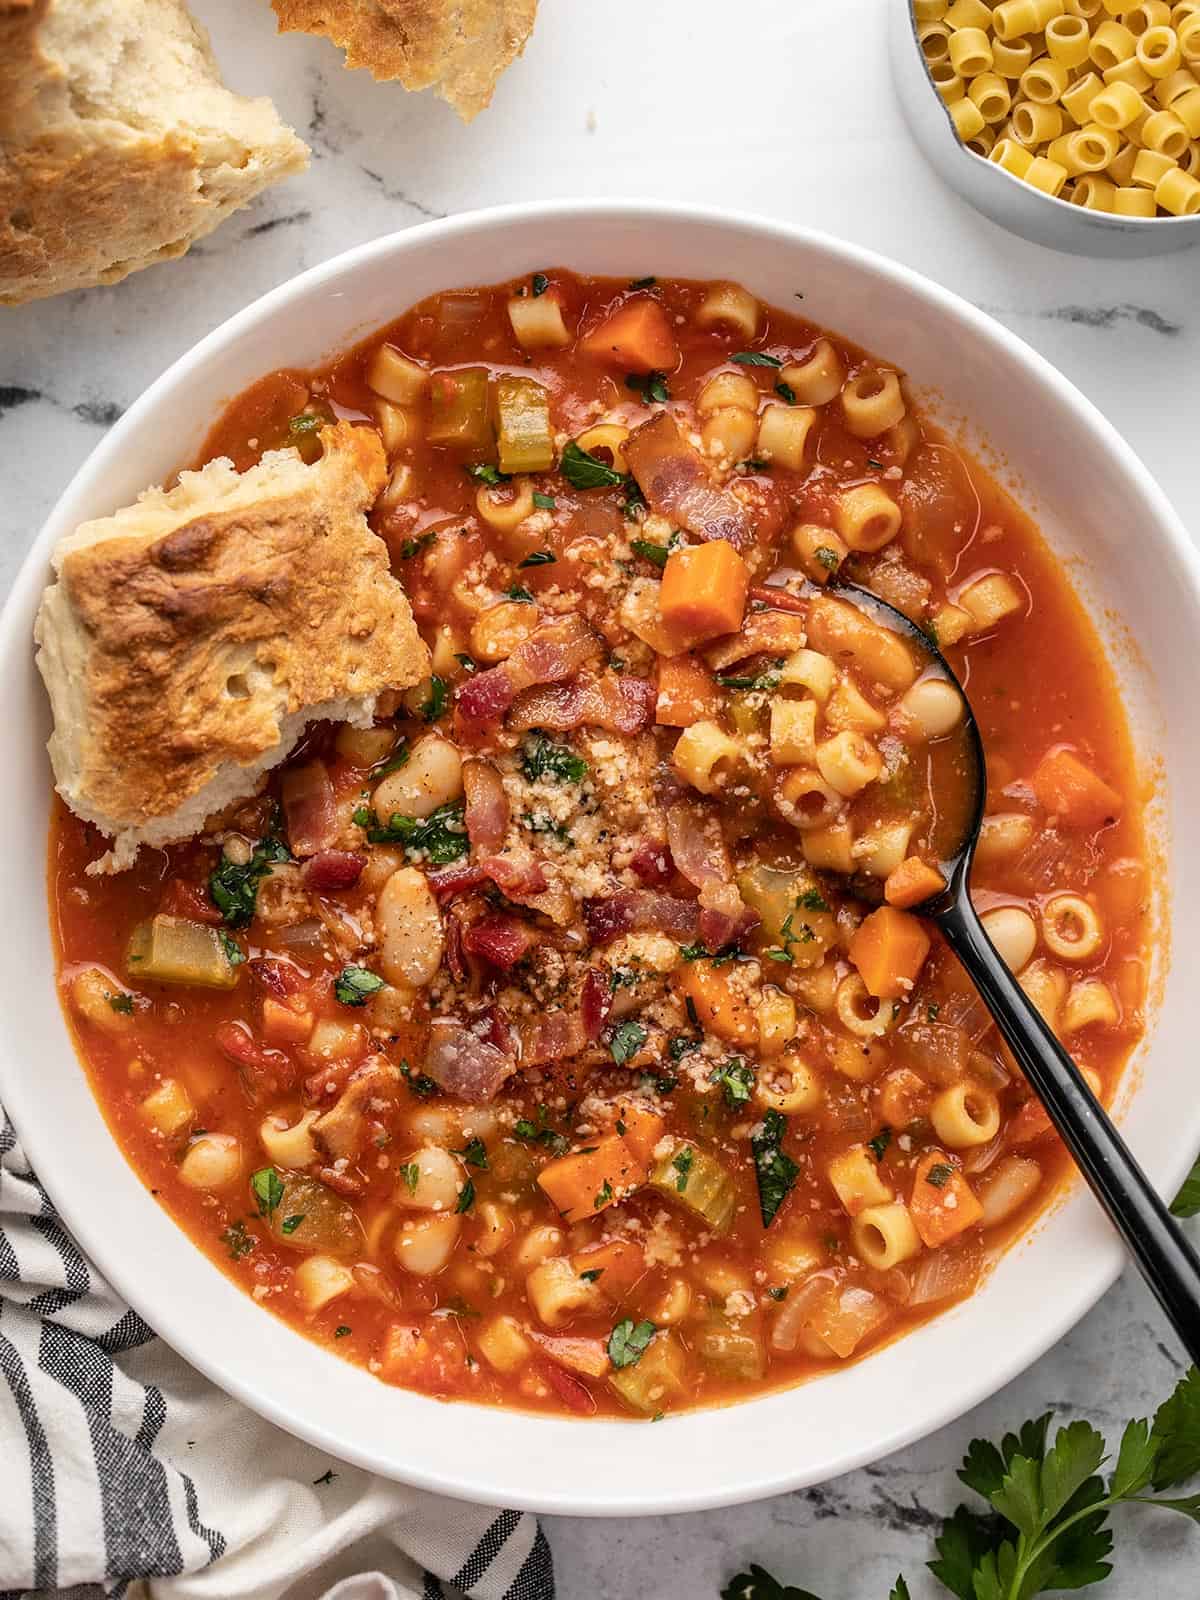 Large bowl of pasta e fagioli soup in a white bowl with a black spoon and topped with a torn piece of bread and surrounded by other ingredients like more bread, uncooked pasta, and a decorative blue and white napkin.